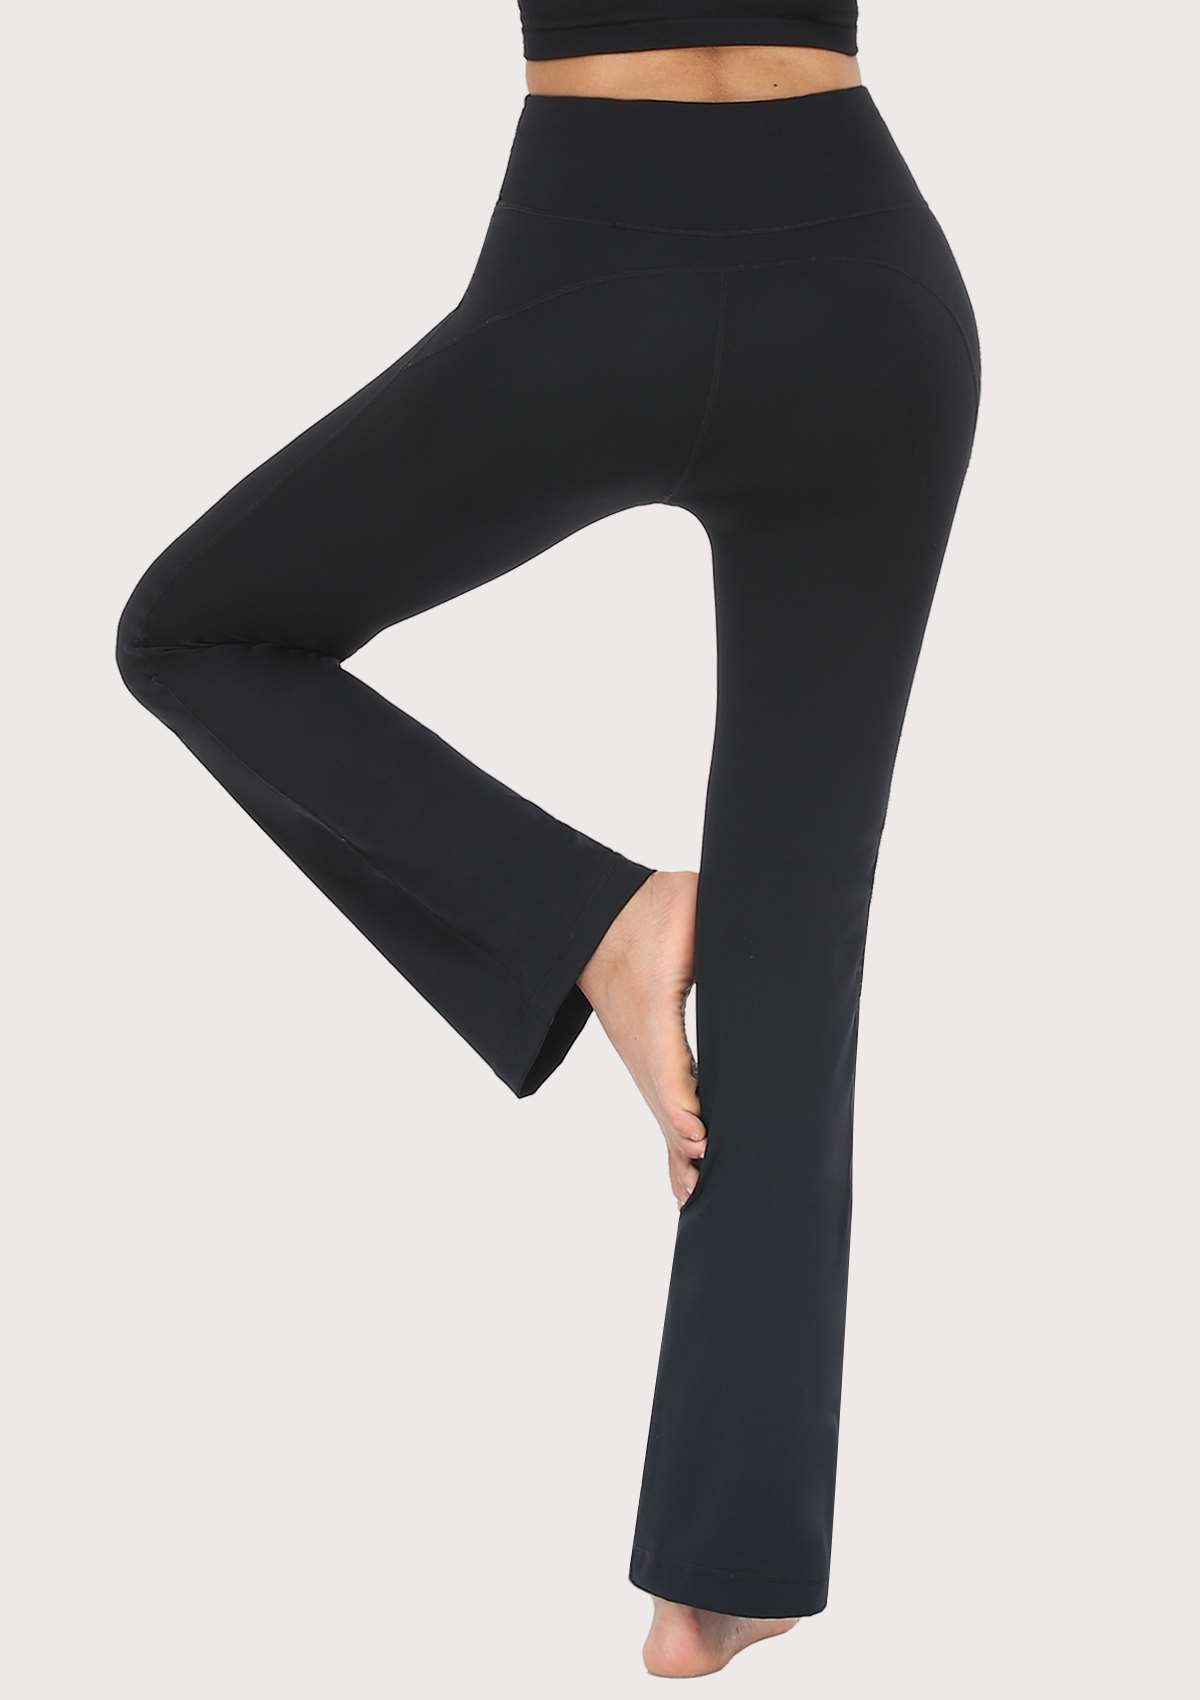 SONGFUL Smooth High Waisted Bootcut Yoga Sports Pants - M / Dark Blue